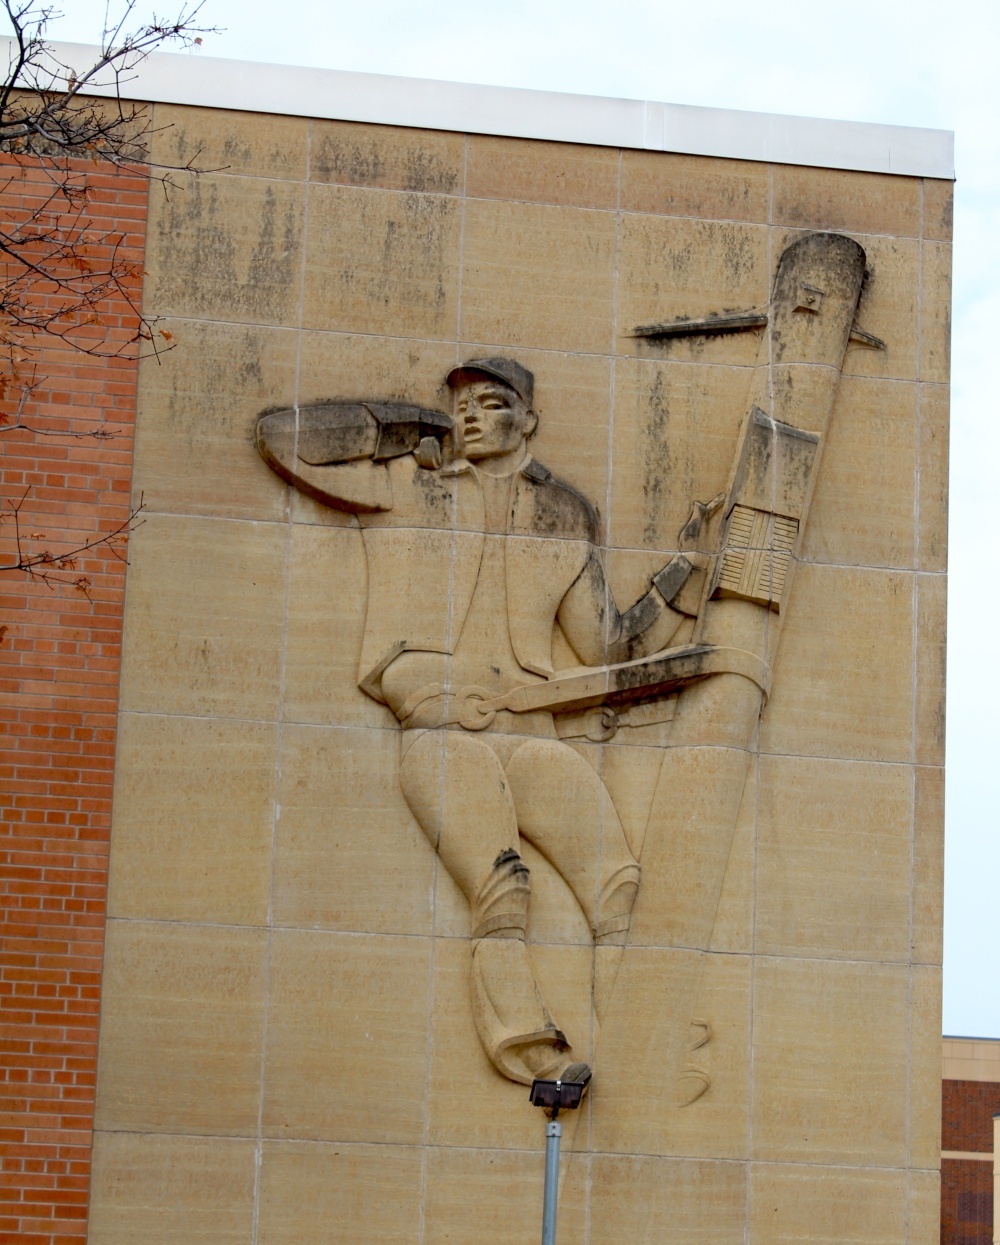 Photo by Mike Lagerquist - The Lineman on the Consolidated Communications building in Mankato